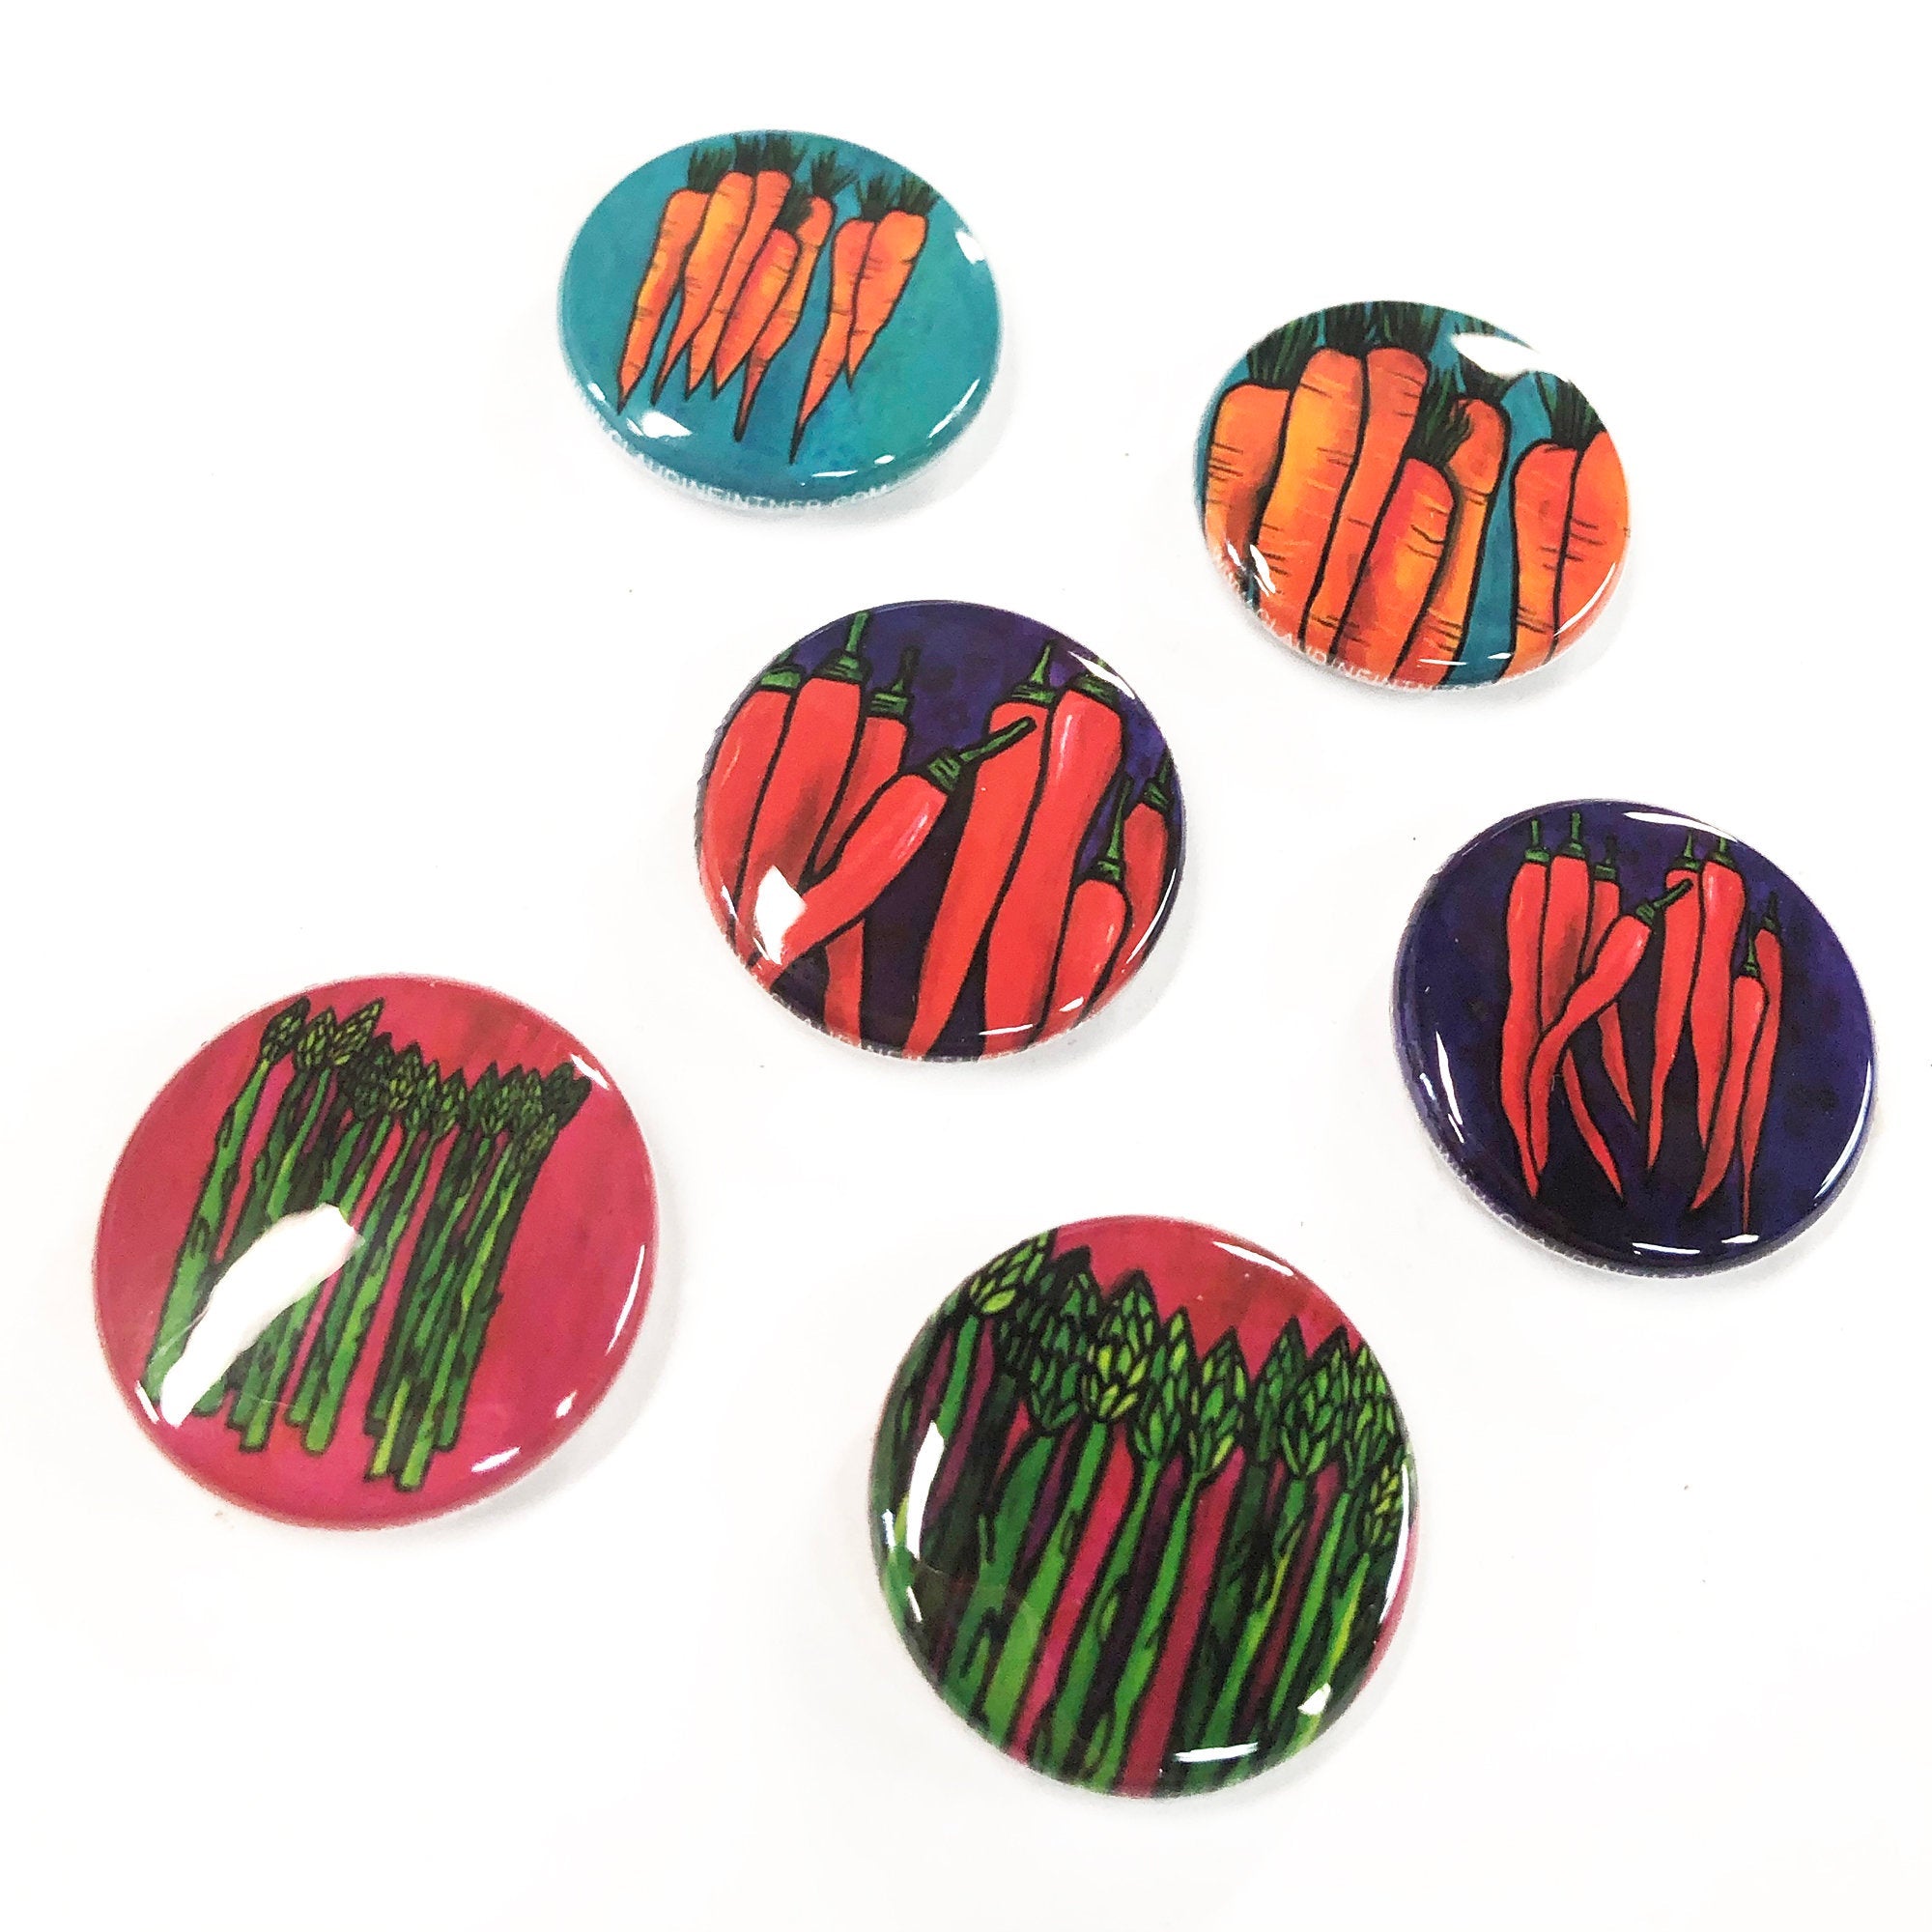 Vegetable Magnet or Pin Set with Carrots, Chili Peppers, and Asparagus